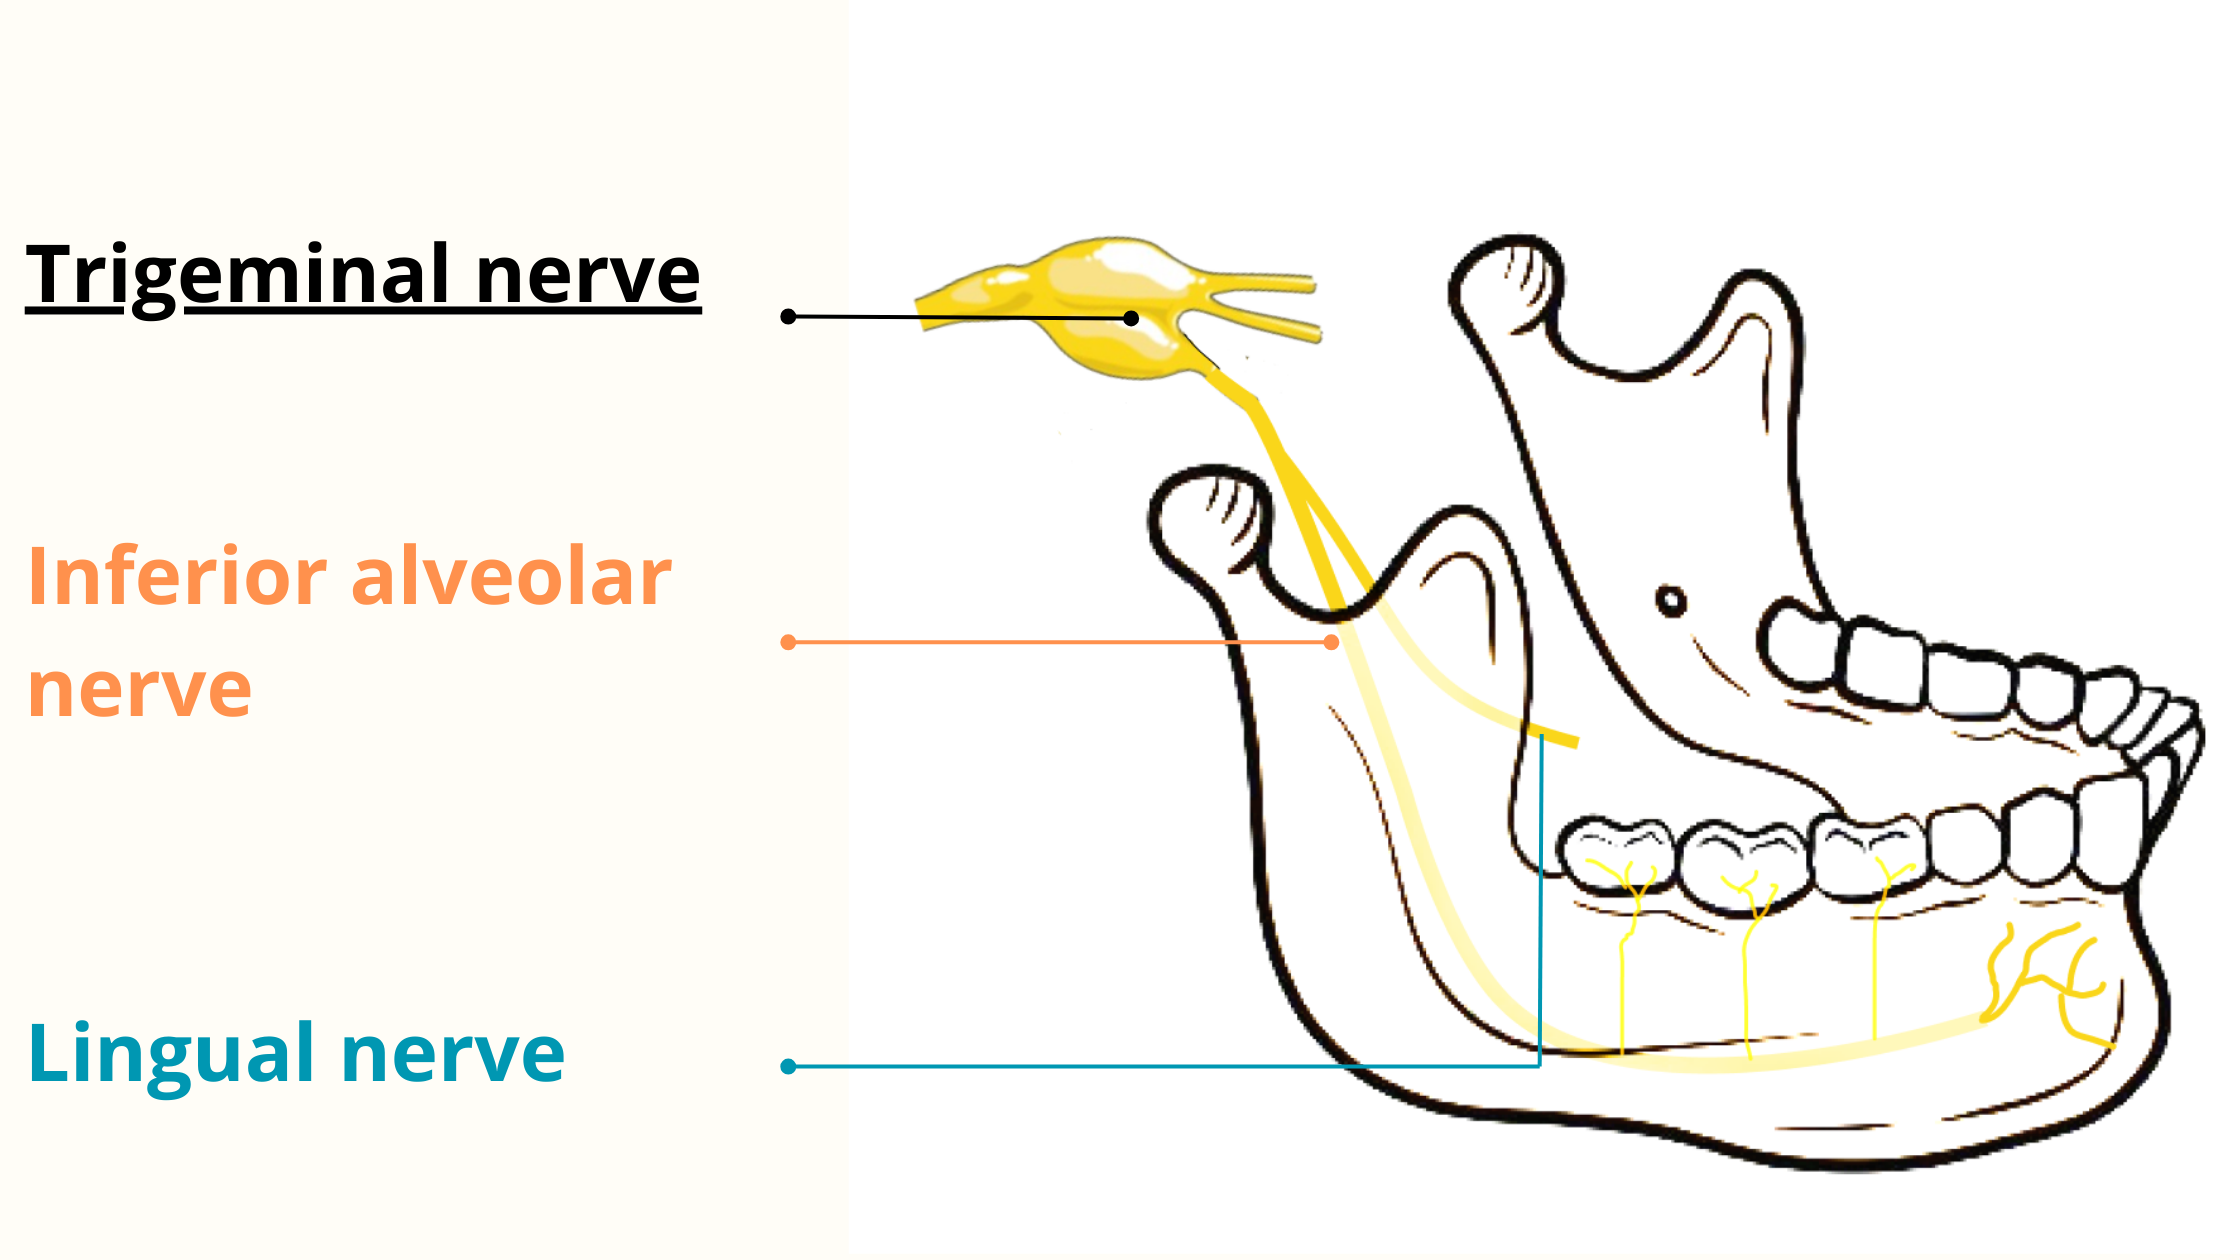 Trigeminal nerve branches off towards the lower jaw to give the inferior alveolar nerve and the ligual nerve